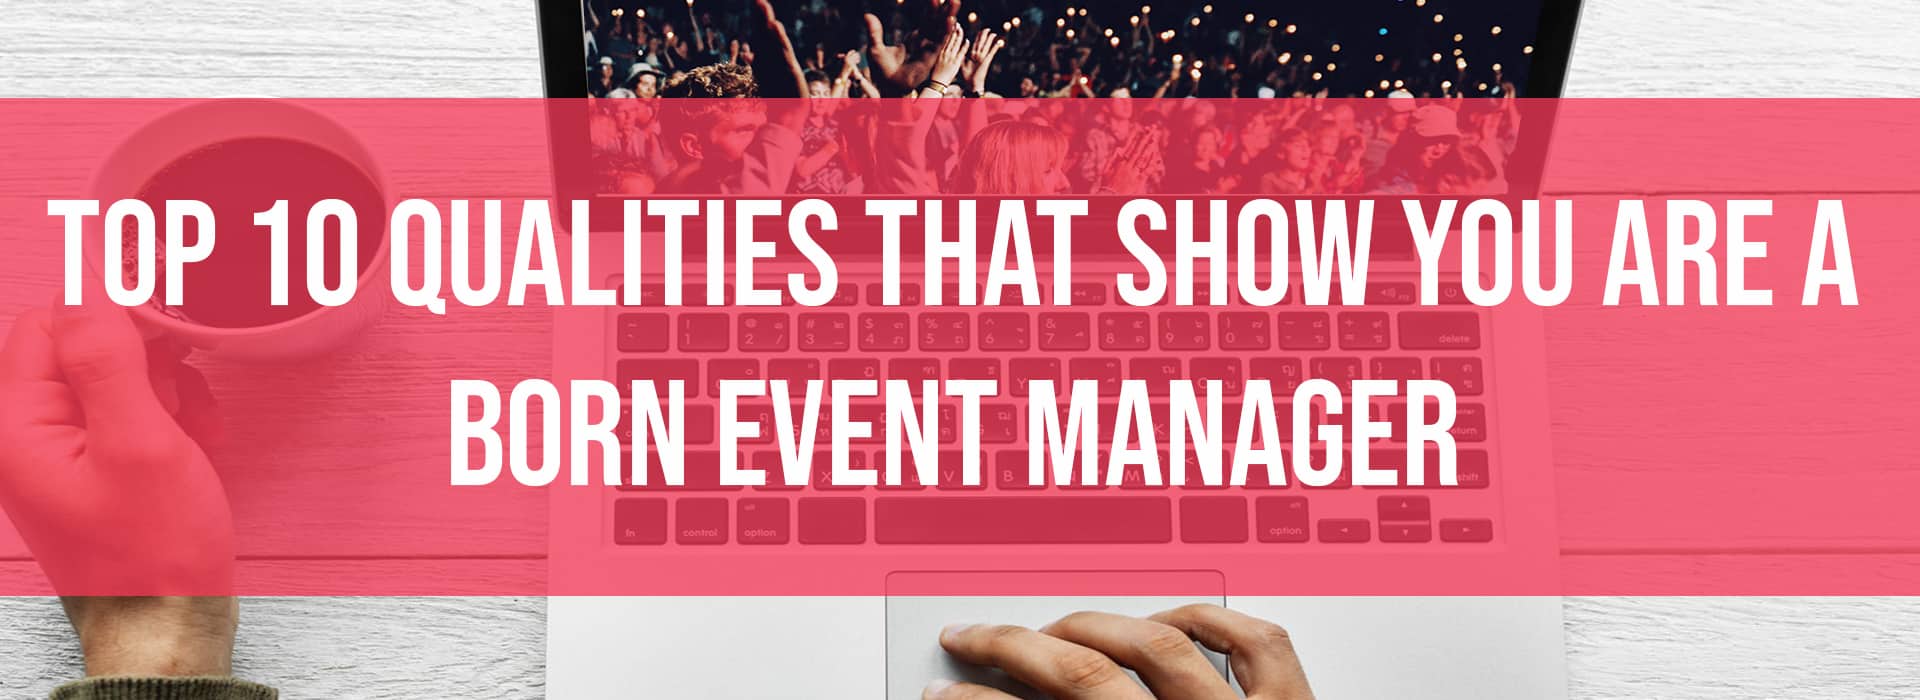 Top 10 Qualities That Show You Are a Born Event Manager